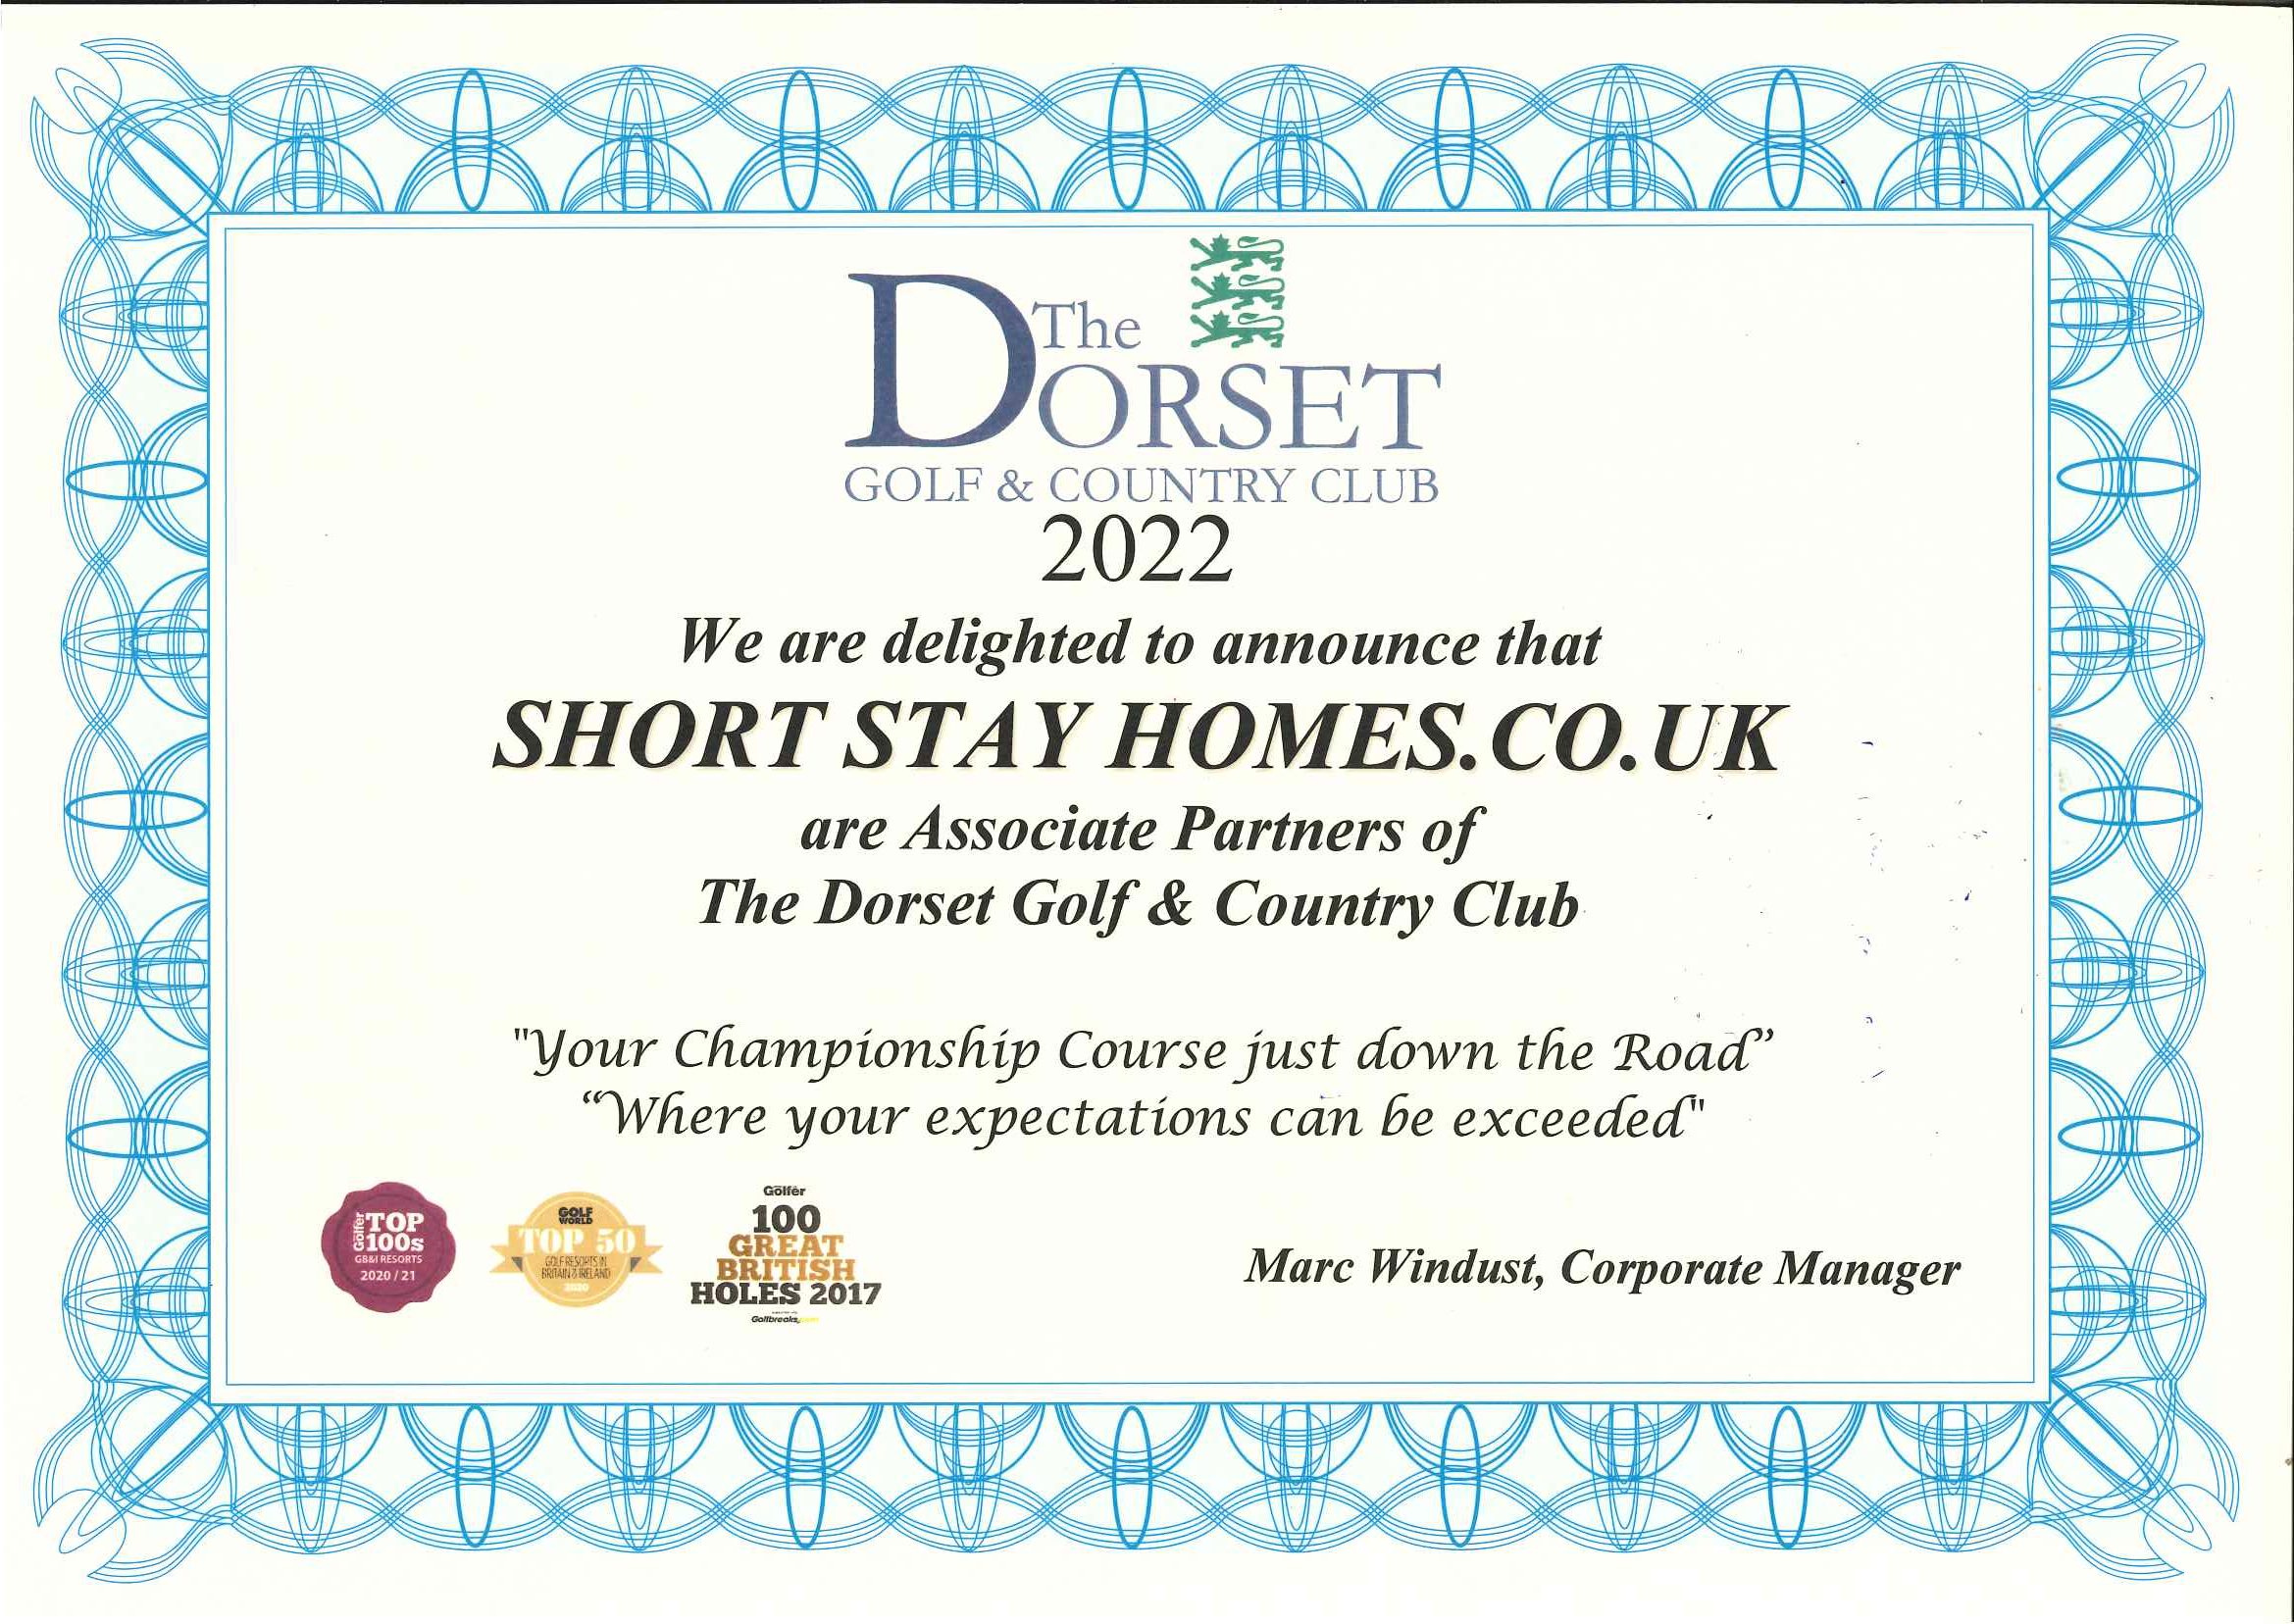 Certificate of Associate partnership with Dorset Golf and Country Club